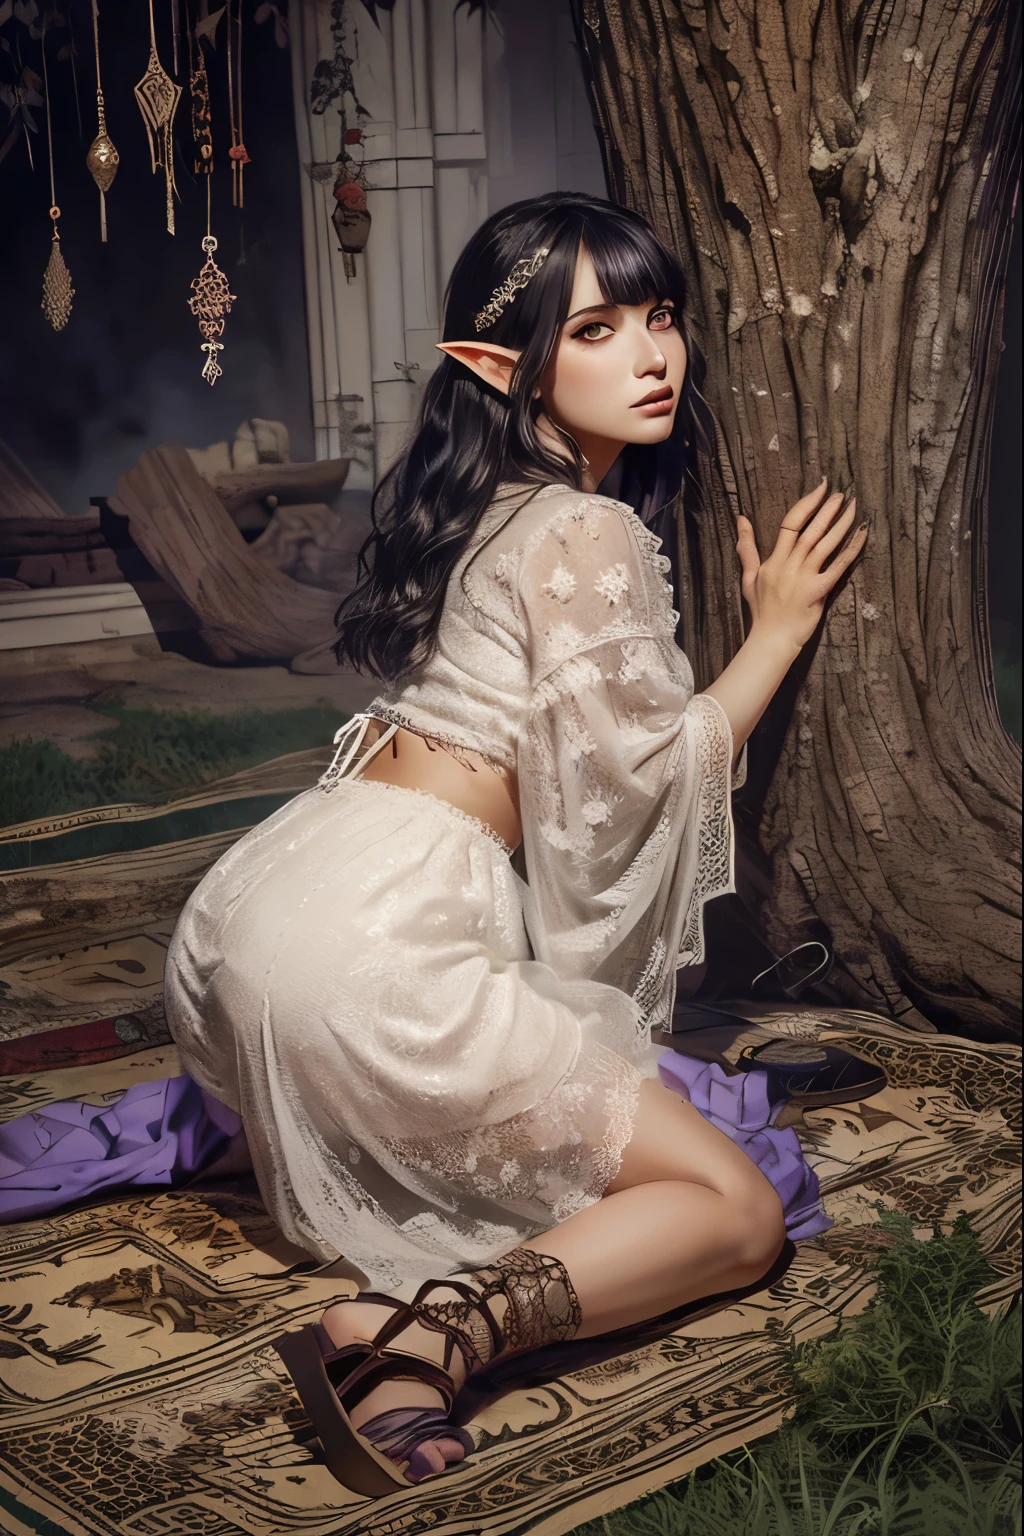 (Ultra-detailed face, looking away), (Fantasy Illustration with Gothic & Ukiyo-e & Comic Art), (1woman, 1cheetah:1.3), (A middle-aged dark elf woman with gray hair, blunt bangs, Very Very long disheveled hair, and dark purple skin, lavender eyes), (EdobCheetah:She is sitting on a rush mat in the shade of a scorching savanna tree, frolicking with a lone cheetah in a daring pose), BREAK (She wears a white linen garabia with red lace and silver ruffles, and blue-colored cotton sandals), BREAK (In the background is a desolate savanna lit by twinkling stars and a red moon)